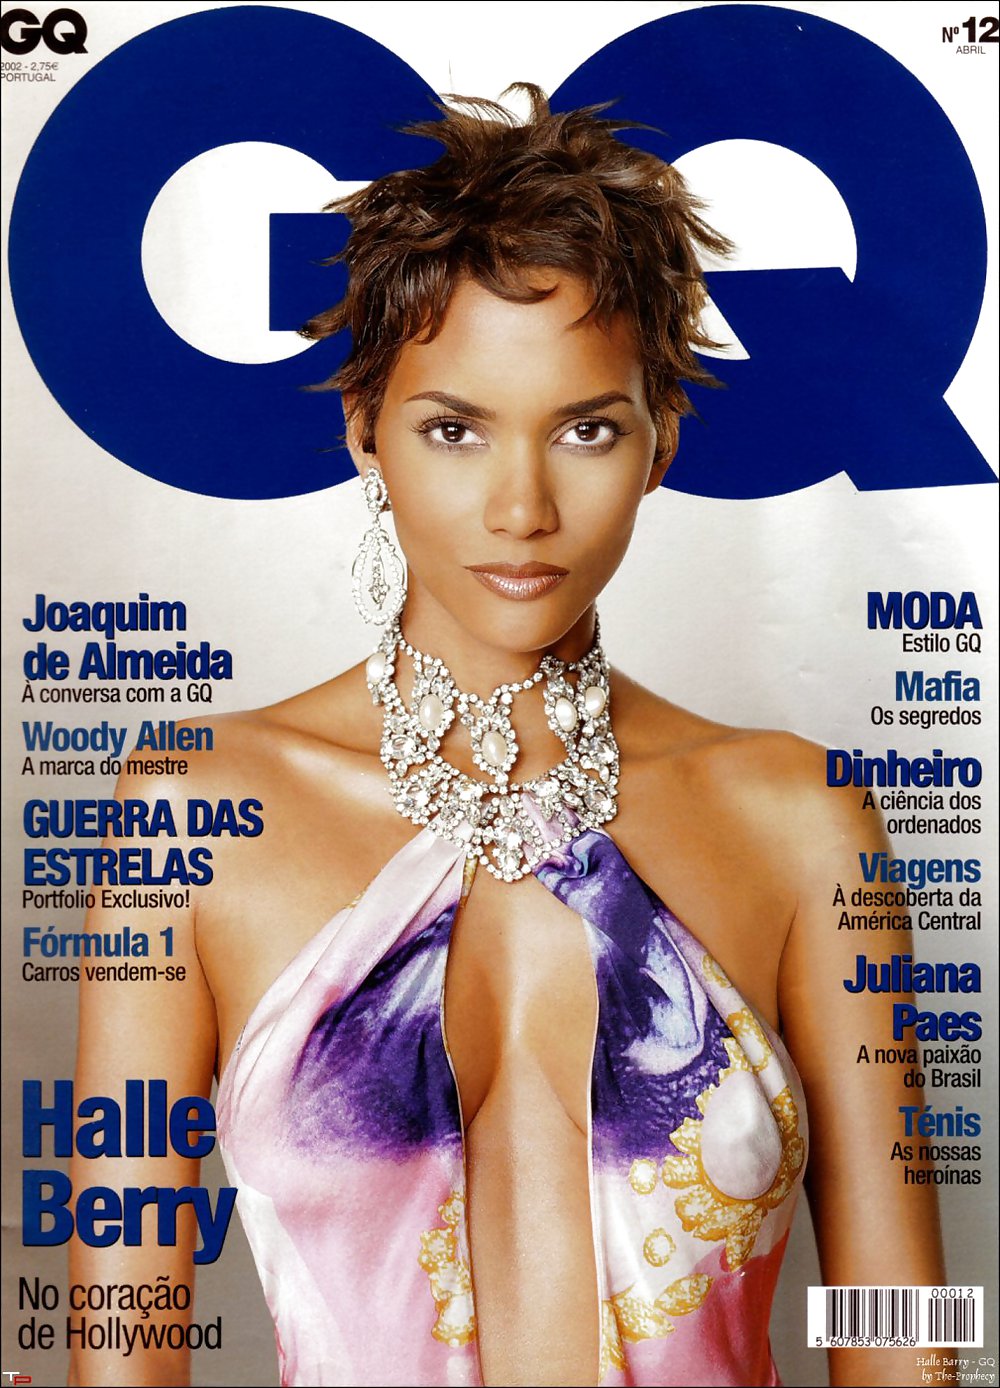 Halle berry ultimate glamour, scollatura, tappi
 #8353432